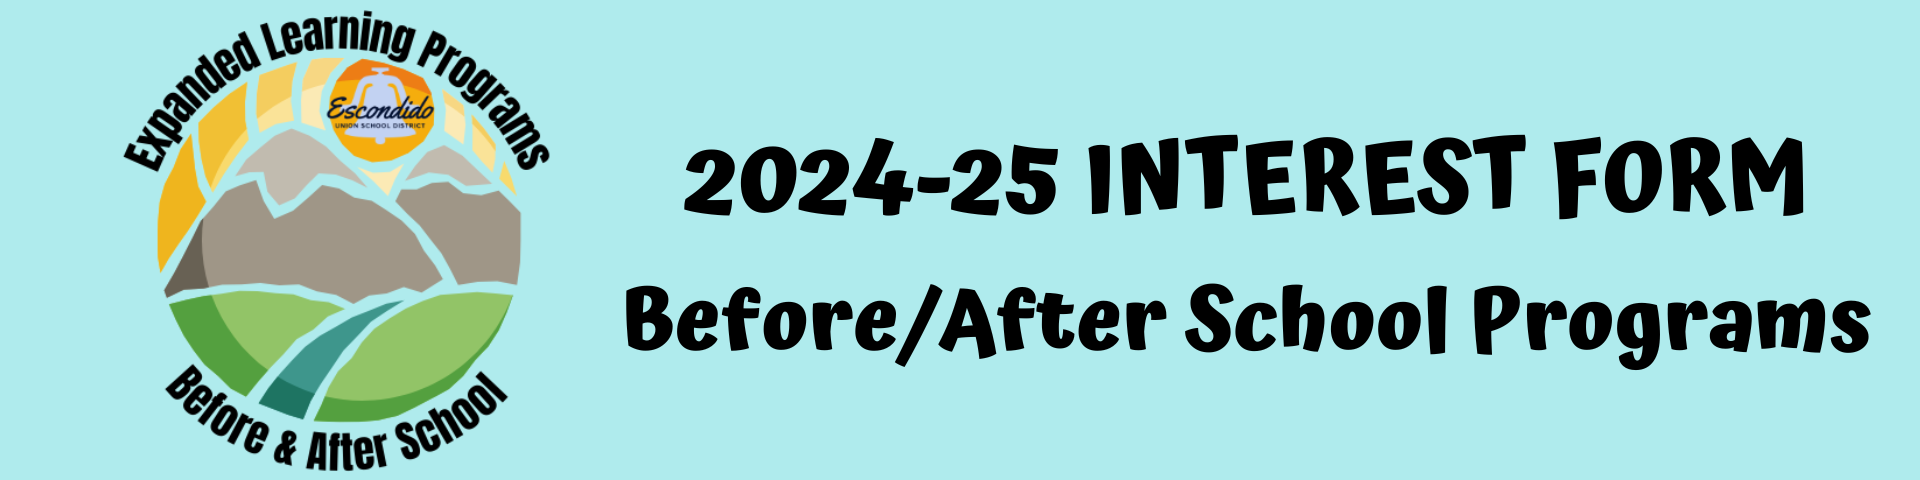 Expanded learning Programs INTEREST FORM: 2024-245Before & After School Programs